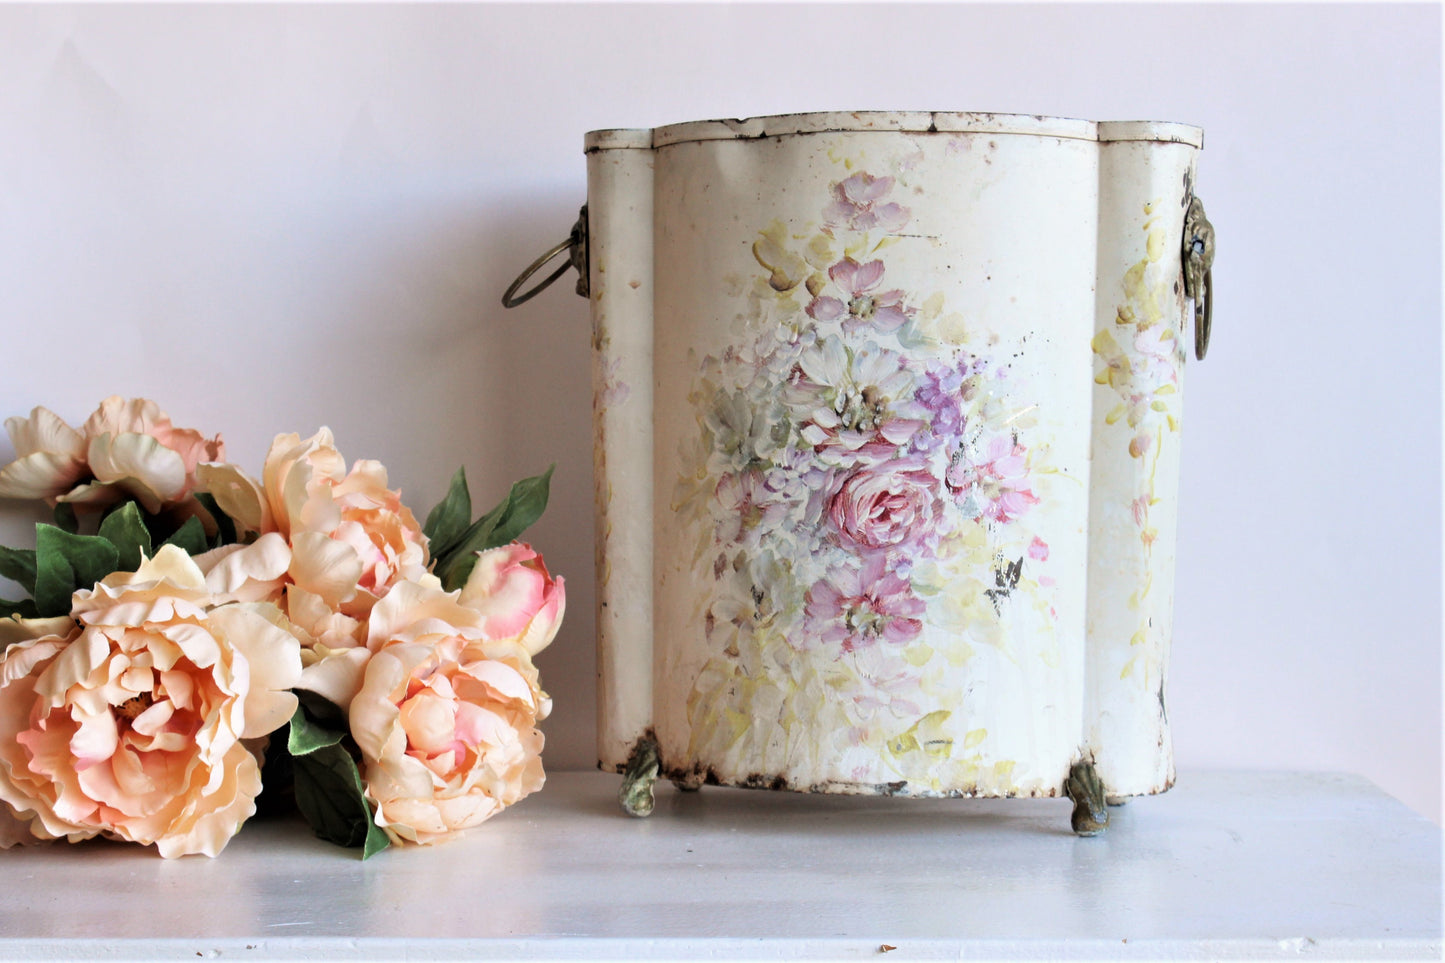 Vintage 1950s Tole Painted Metal Trash Can